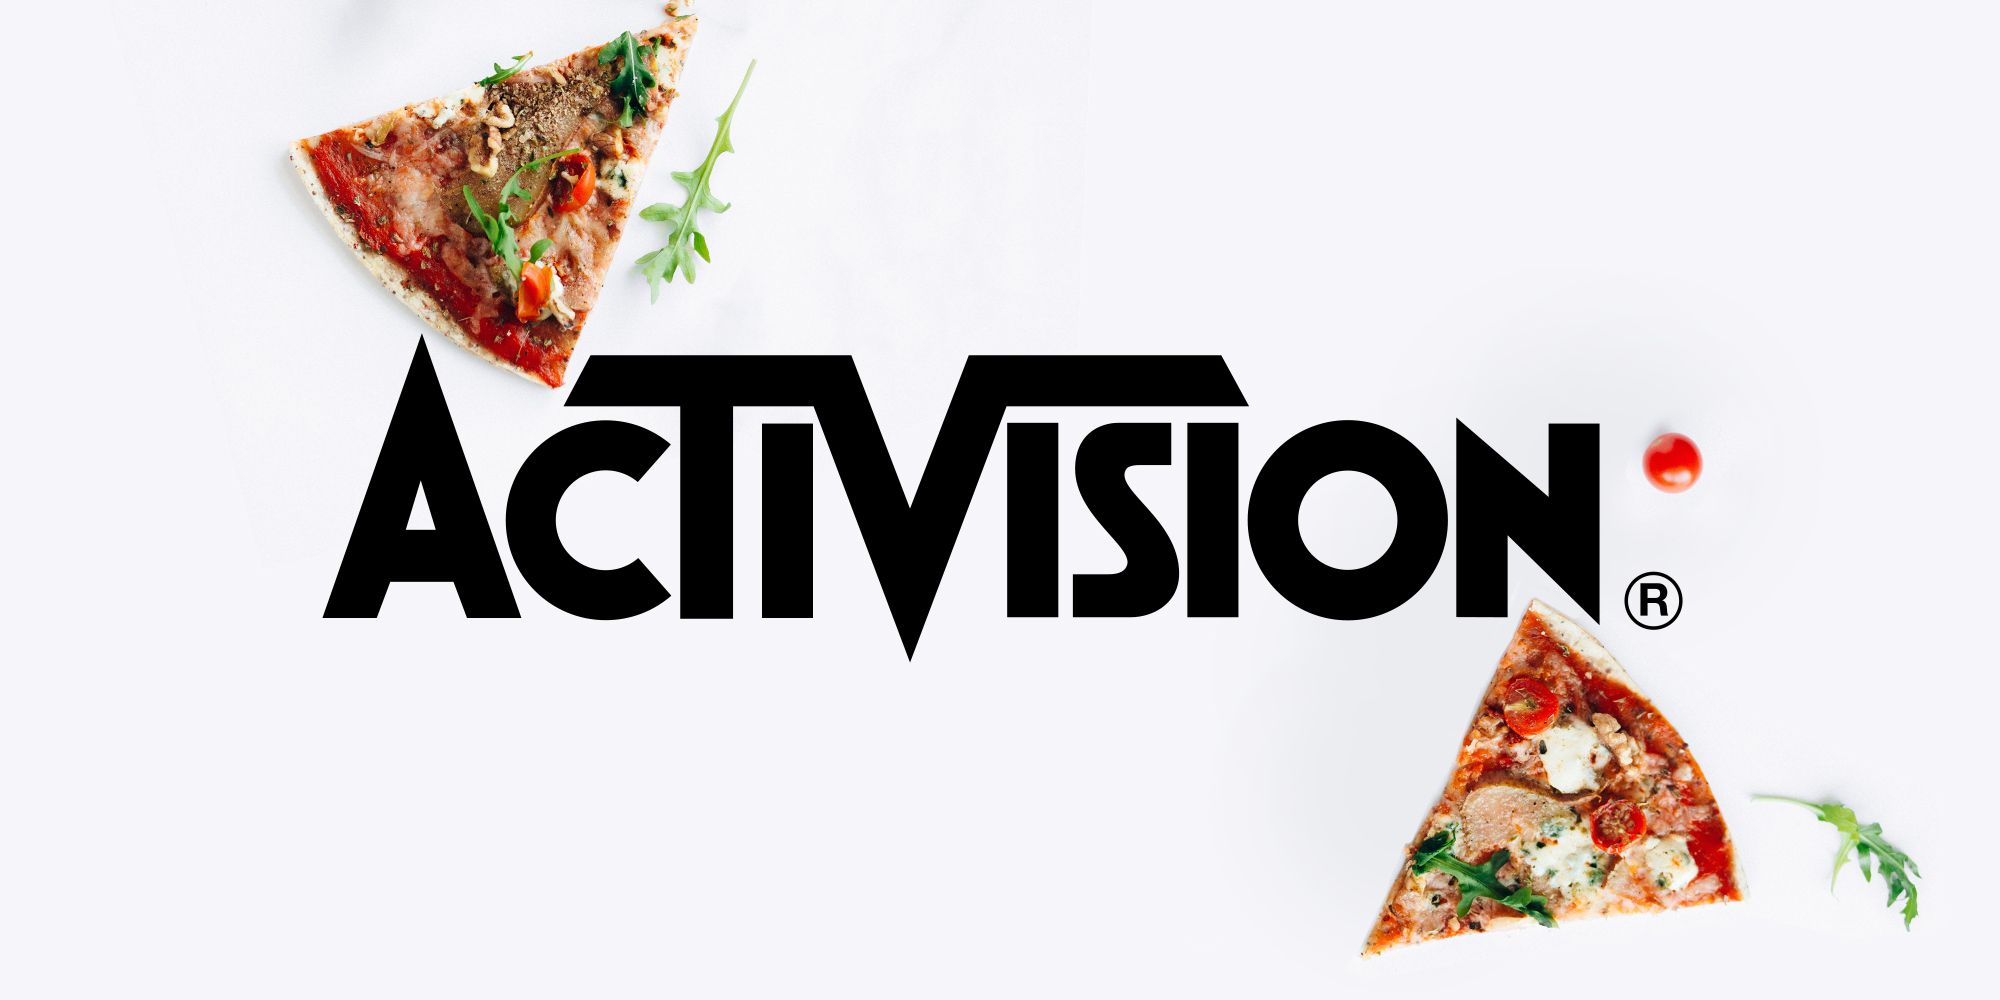 Activision logo surrounded by pizza slices on light gray background